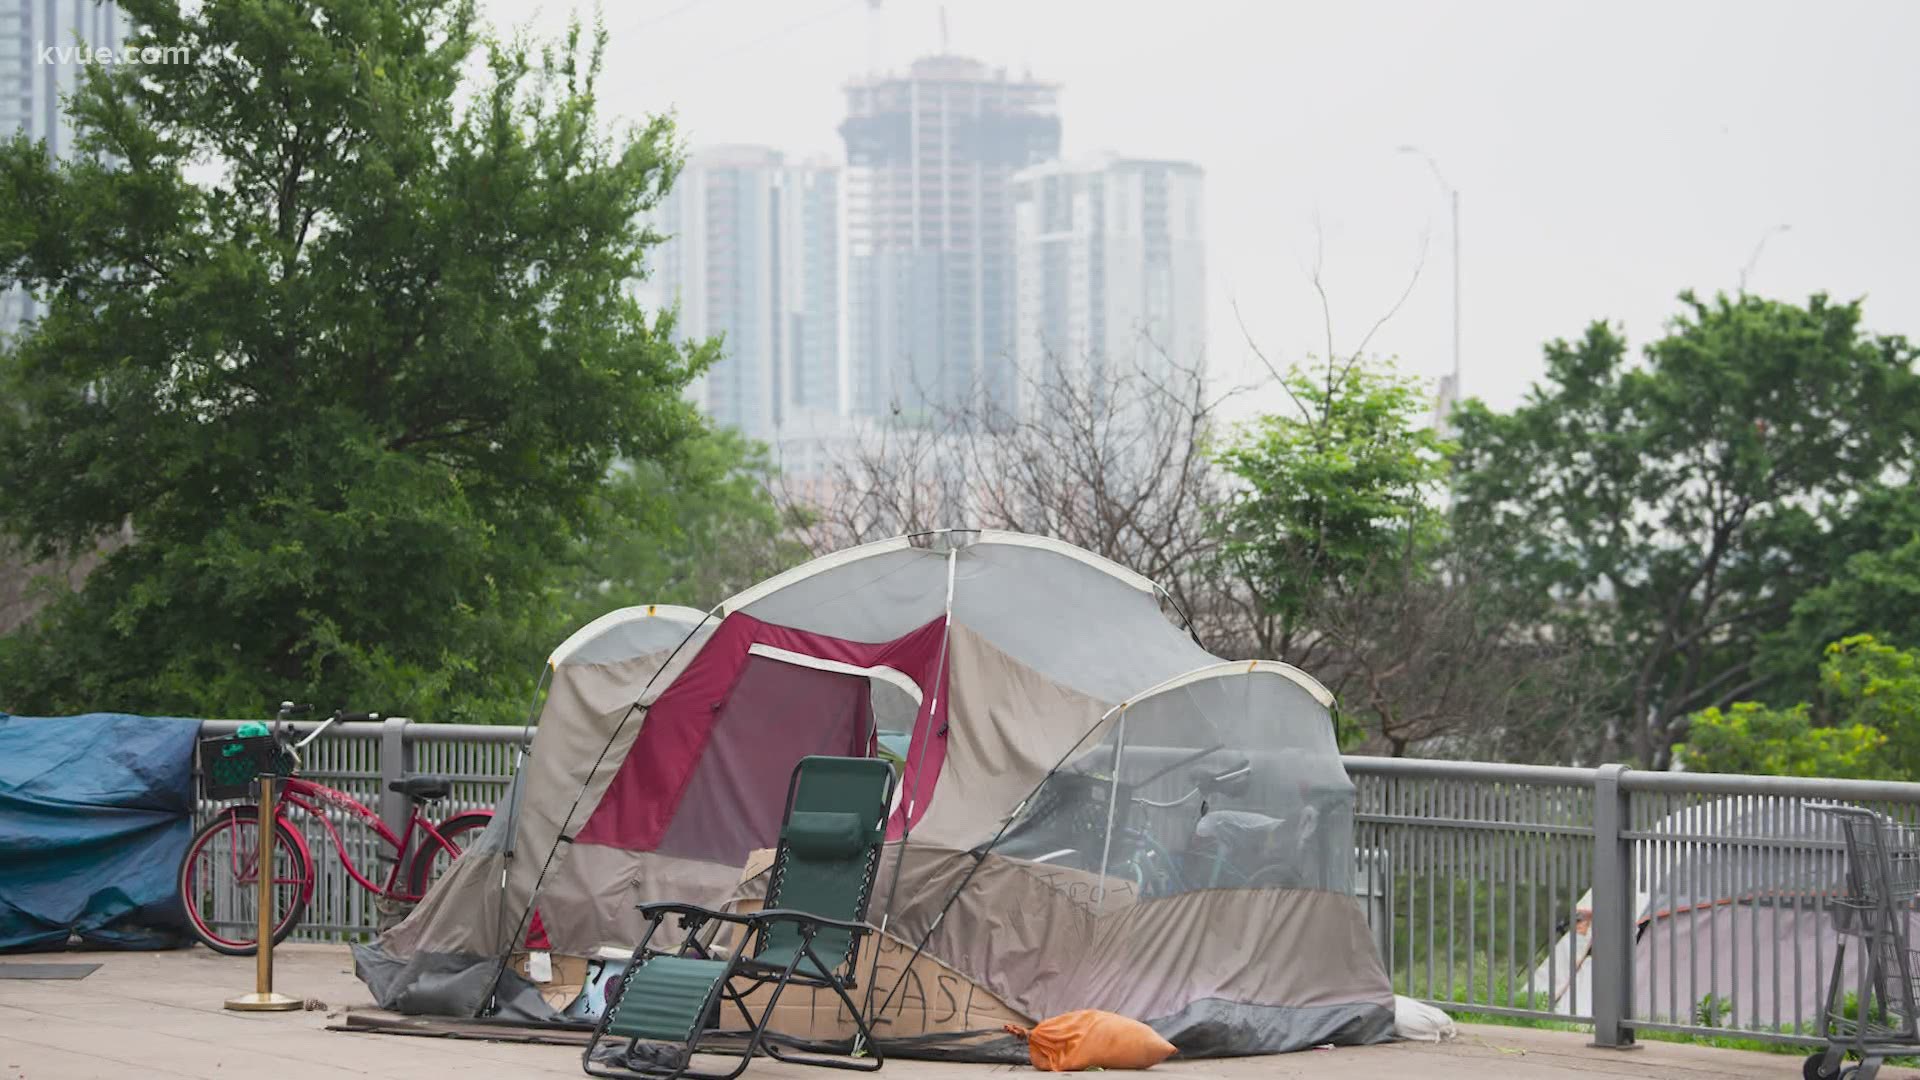 Austin's public camping ban is set to take effect on May 11. On May 10, the City of Austin released a four-phase enforcement plan.